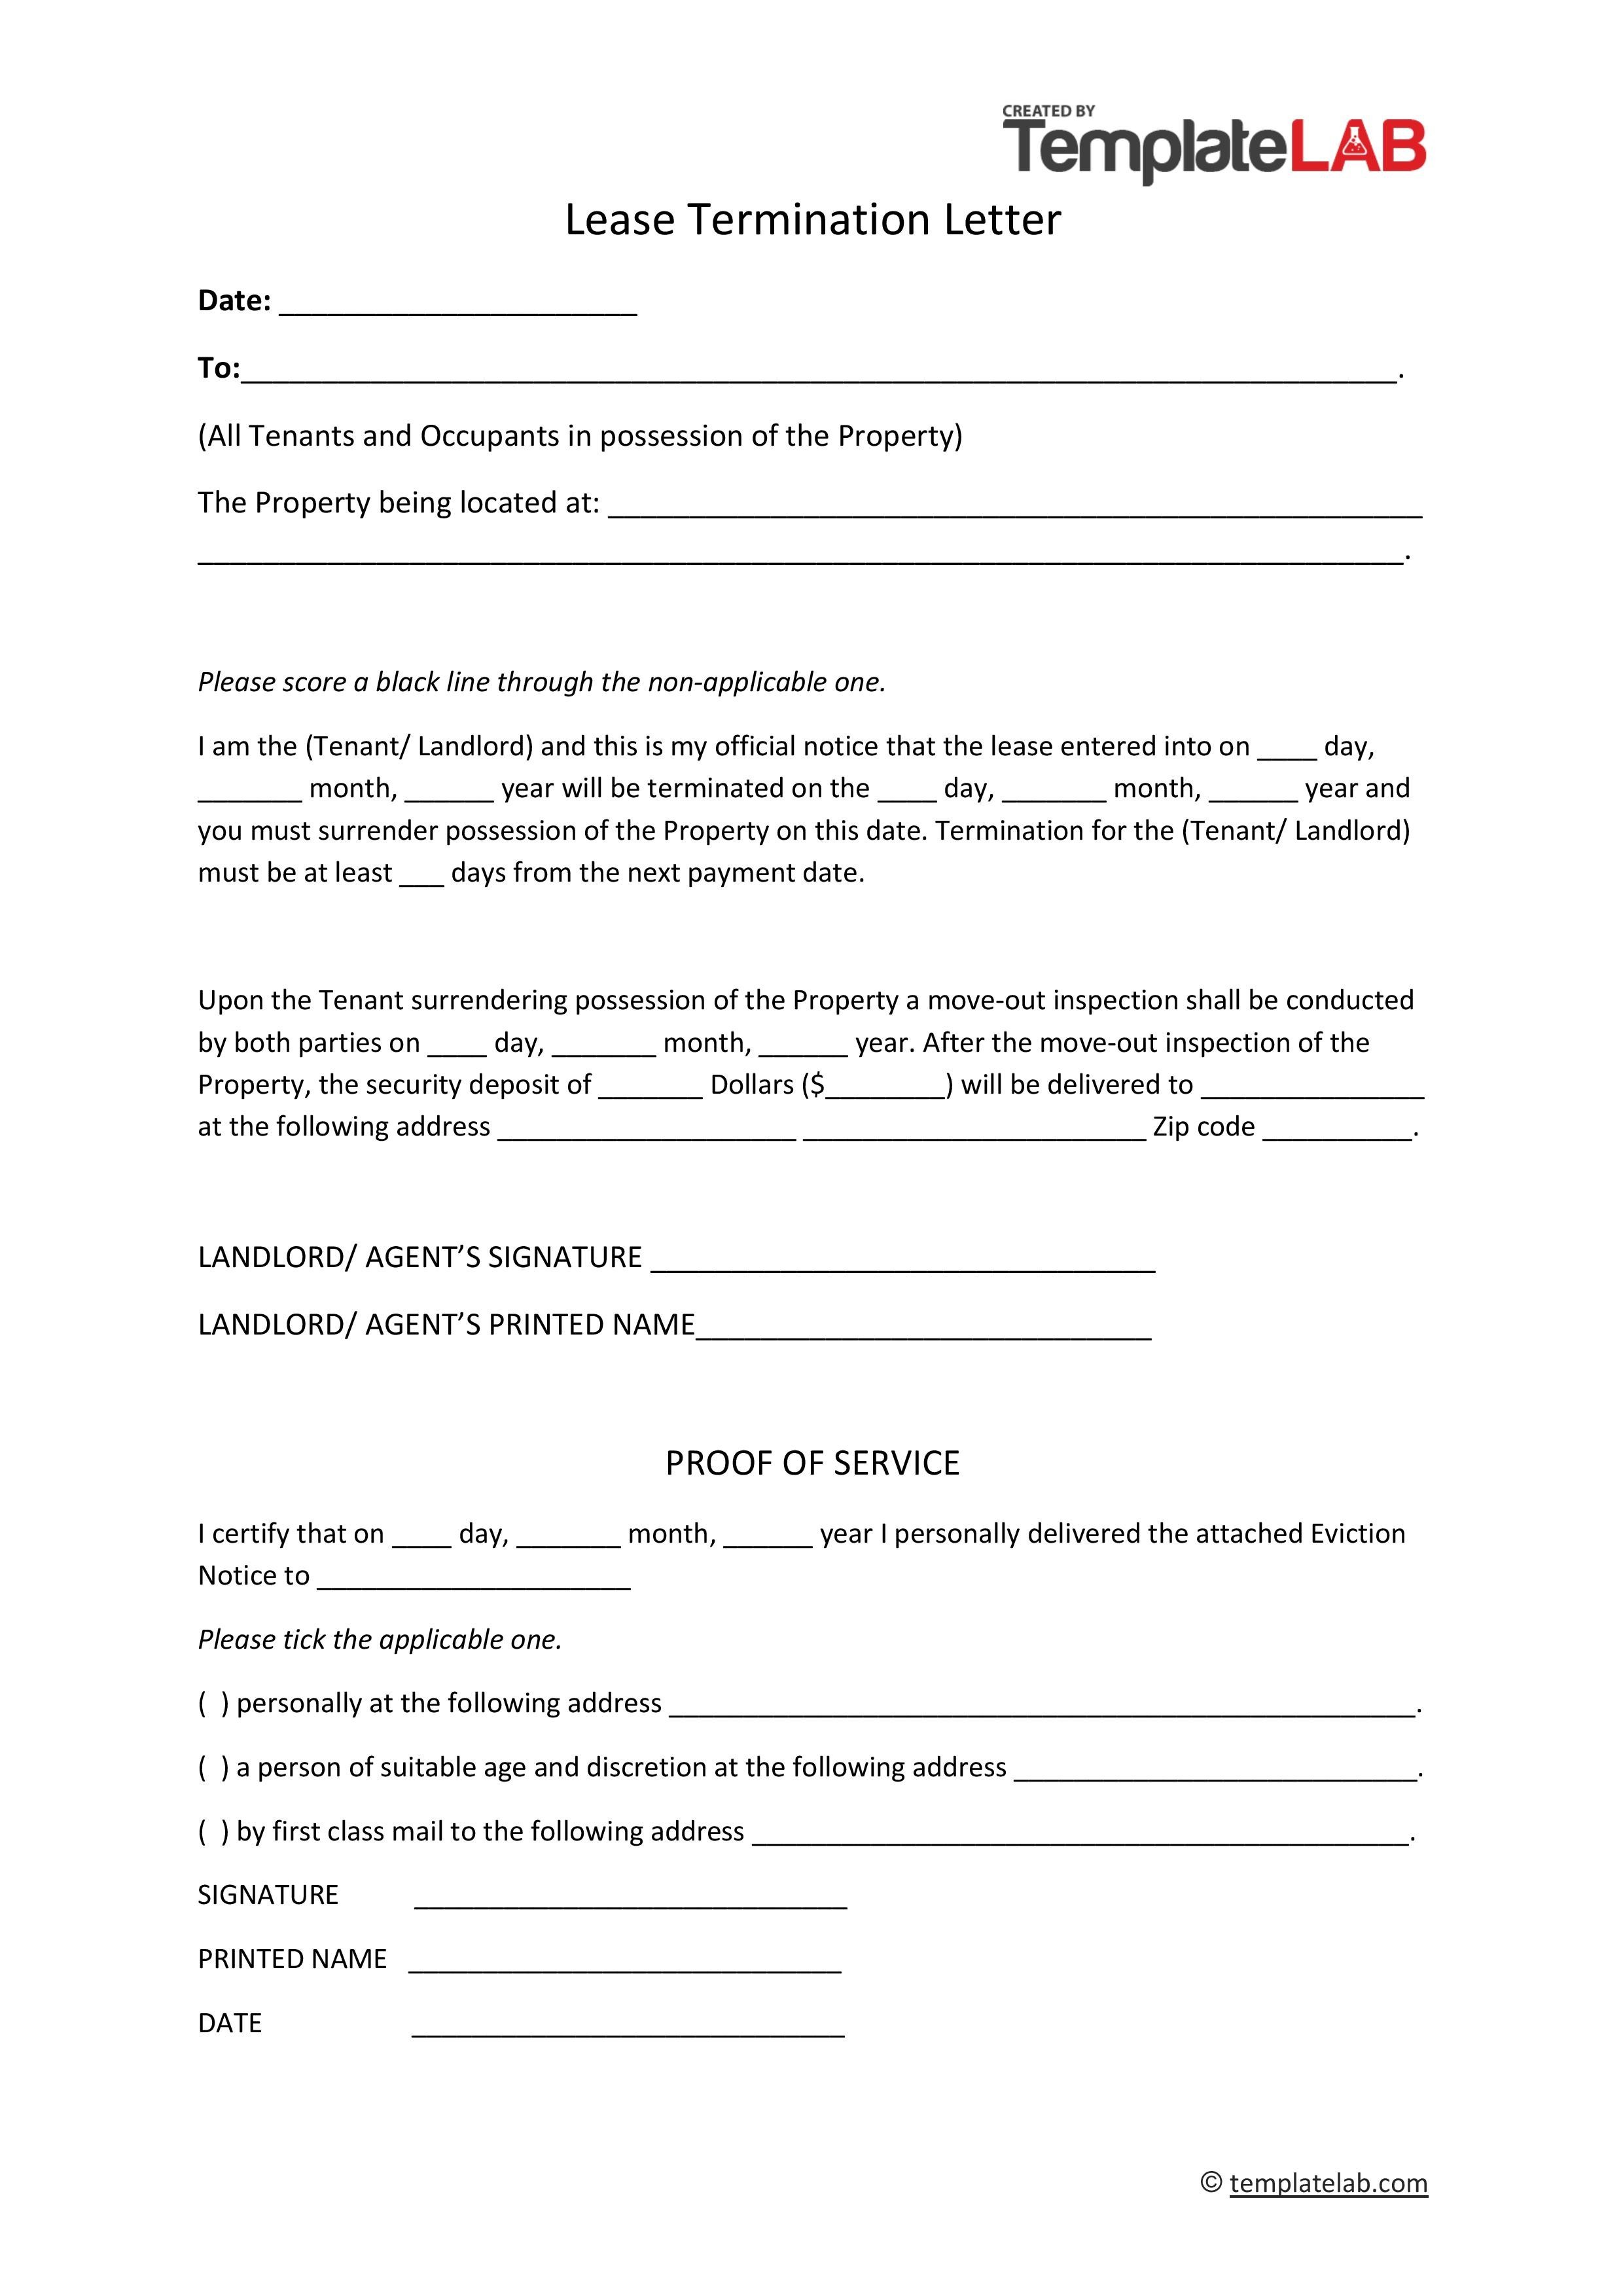 termination-of-al-agreement-letter-template-infoupdate